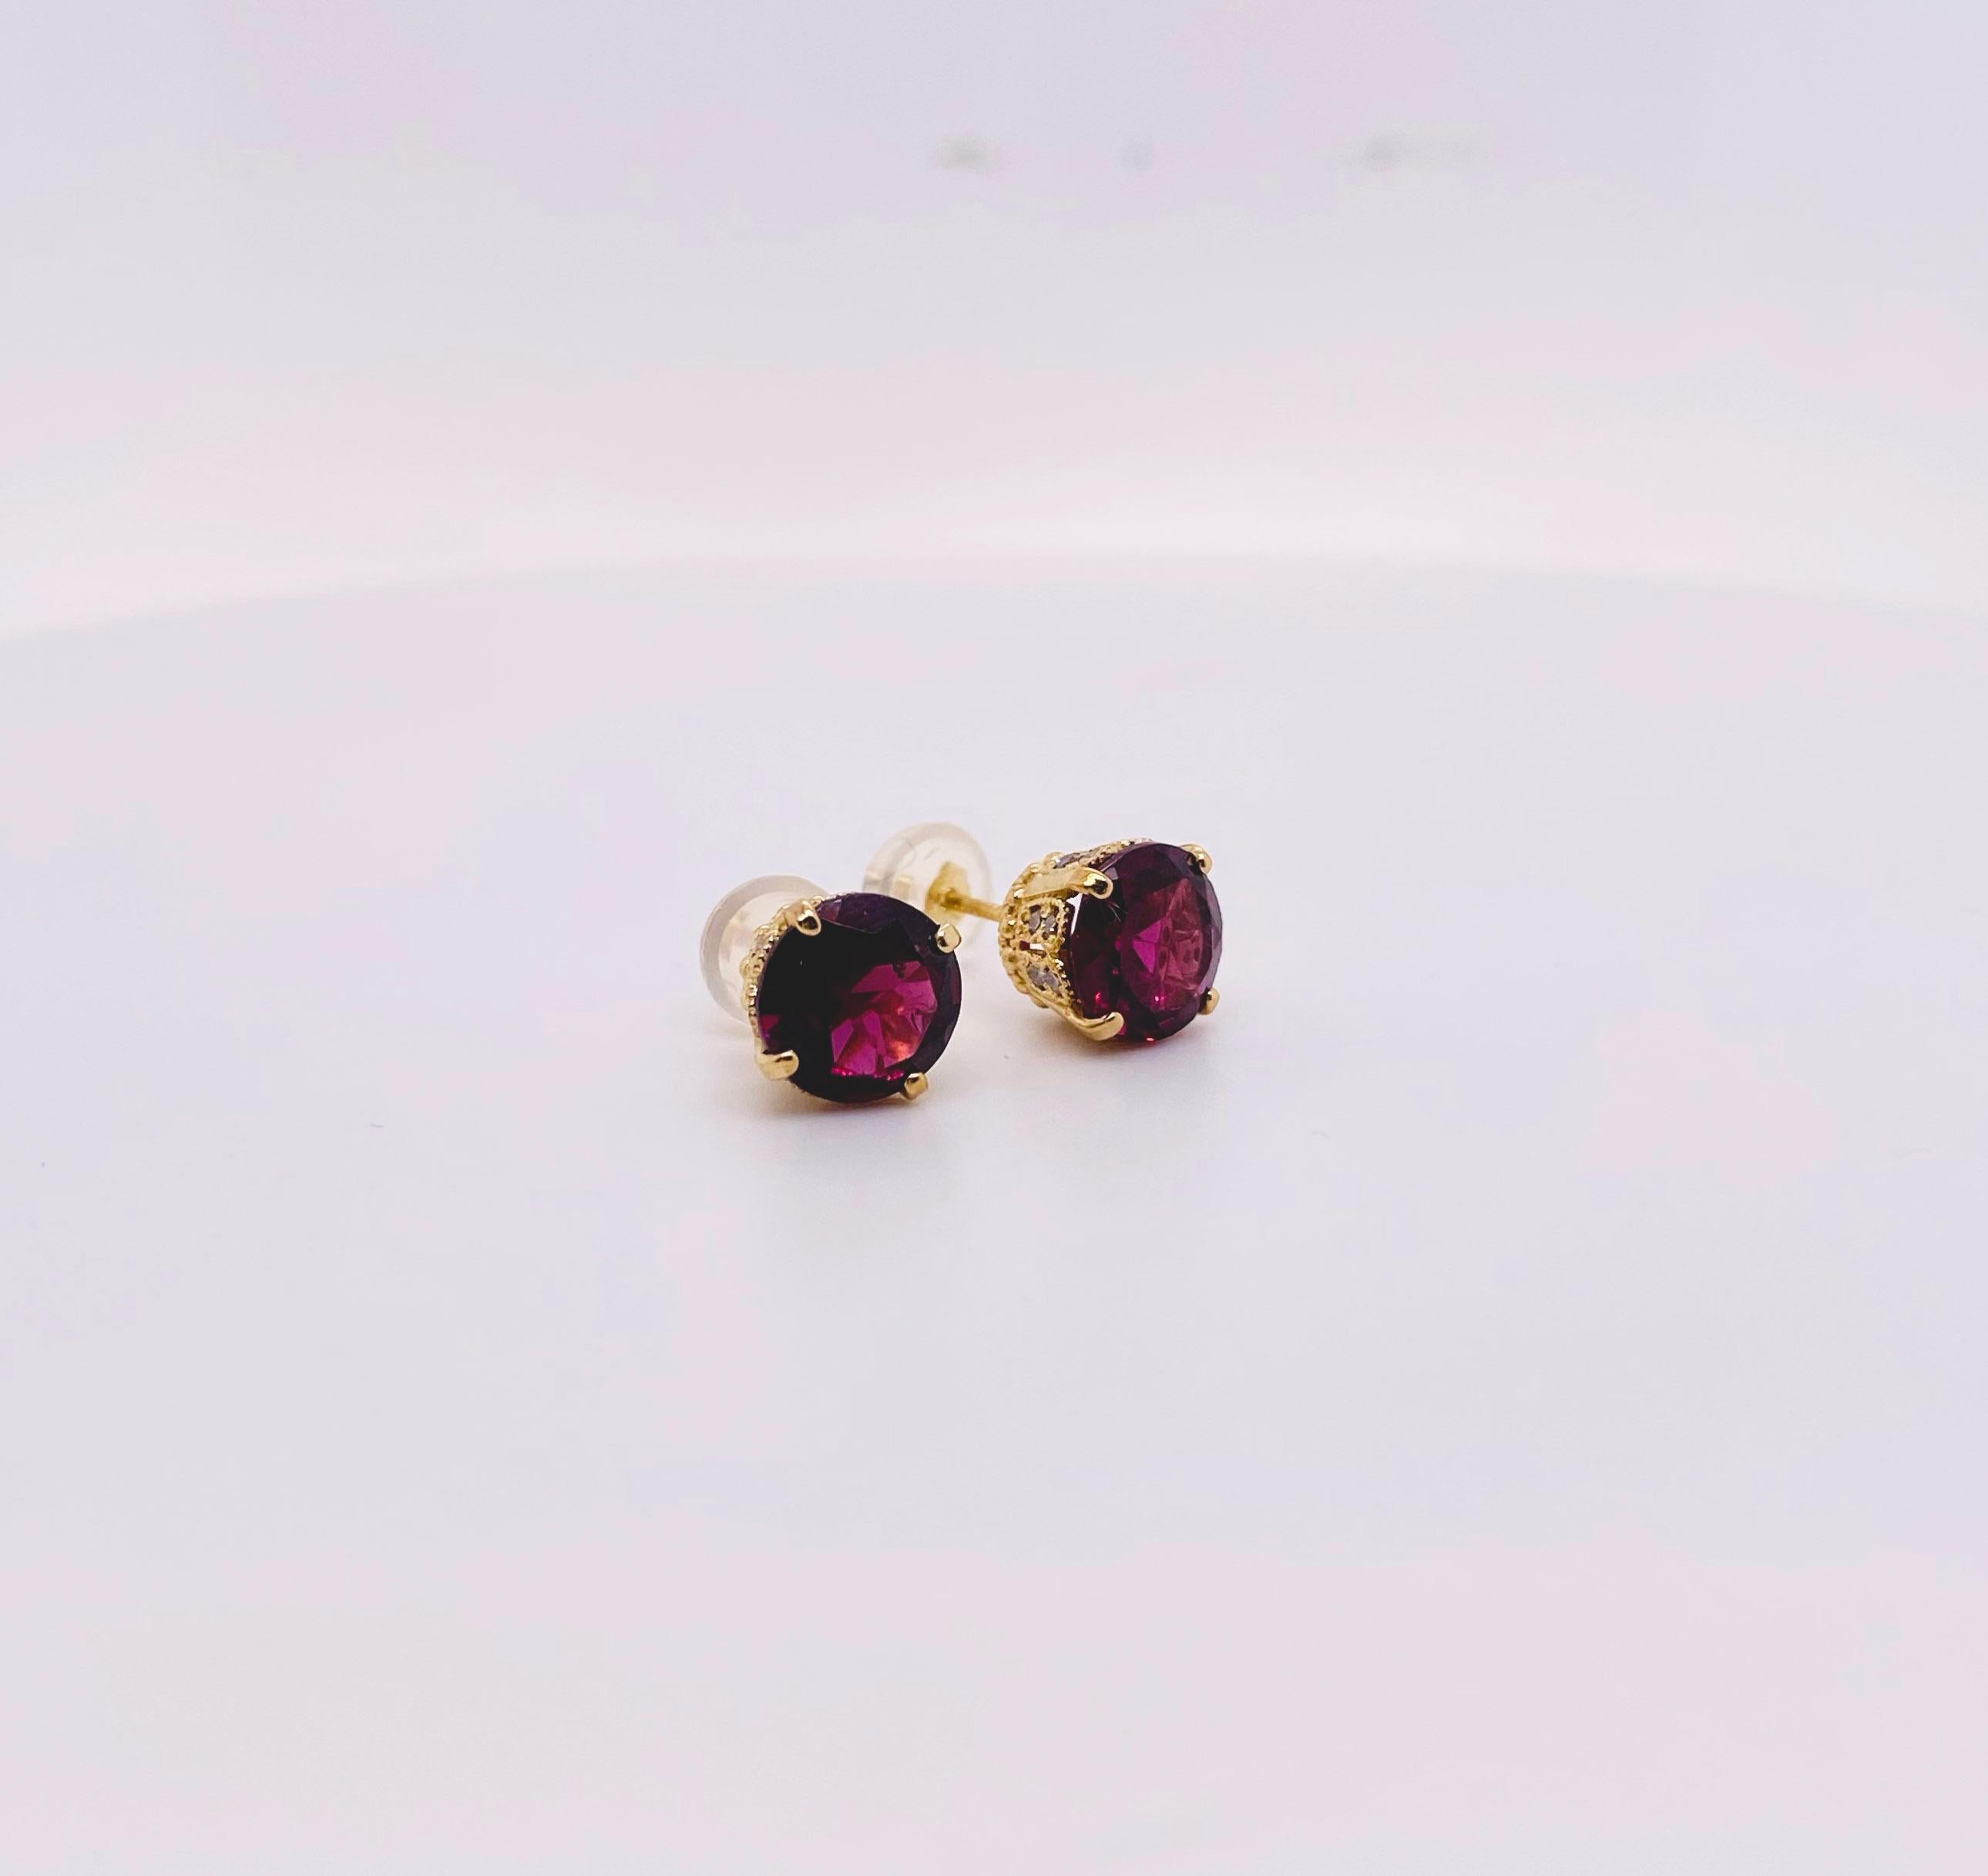 The genuine Rhodalite Garnet stud earrings have 14 karat yellow gold stud style. The details for these gorgeous earrings are listed below:
Metal Quality: 14 K Yellow Gold 
Earring Type: Stud
Gemstone: Garnet (Rhodalite)
Gemstone Weight: 1.82